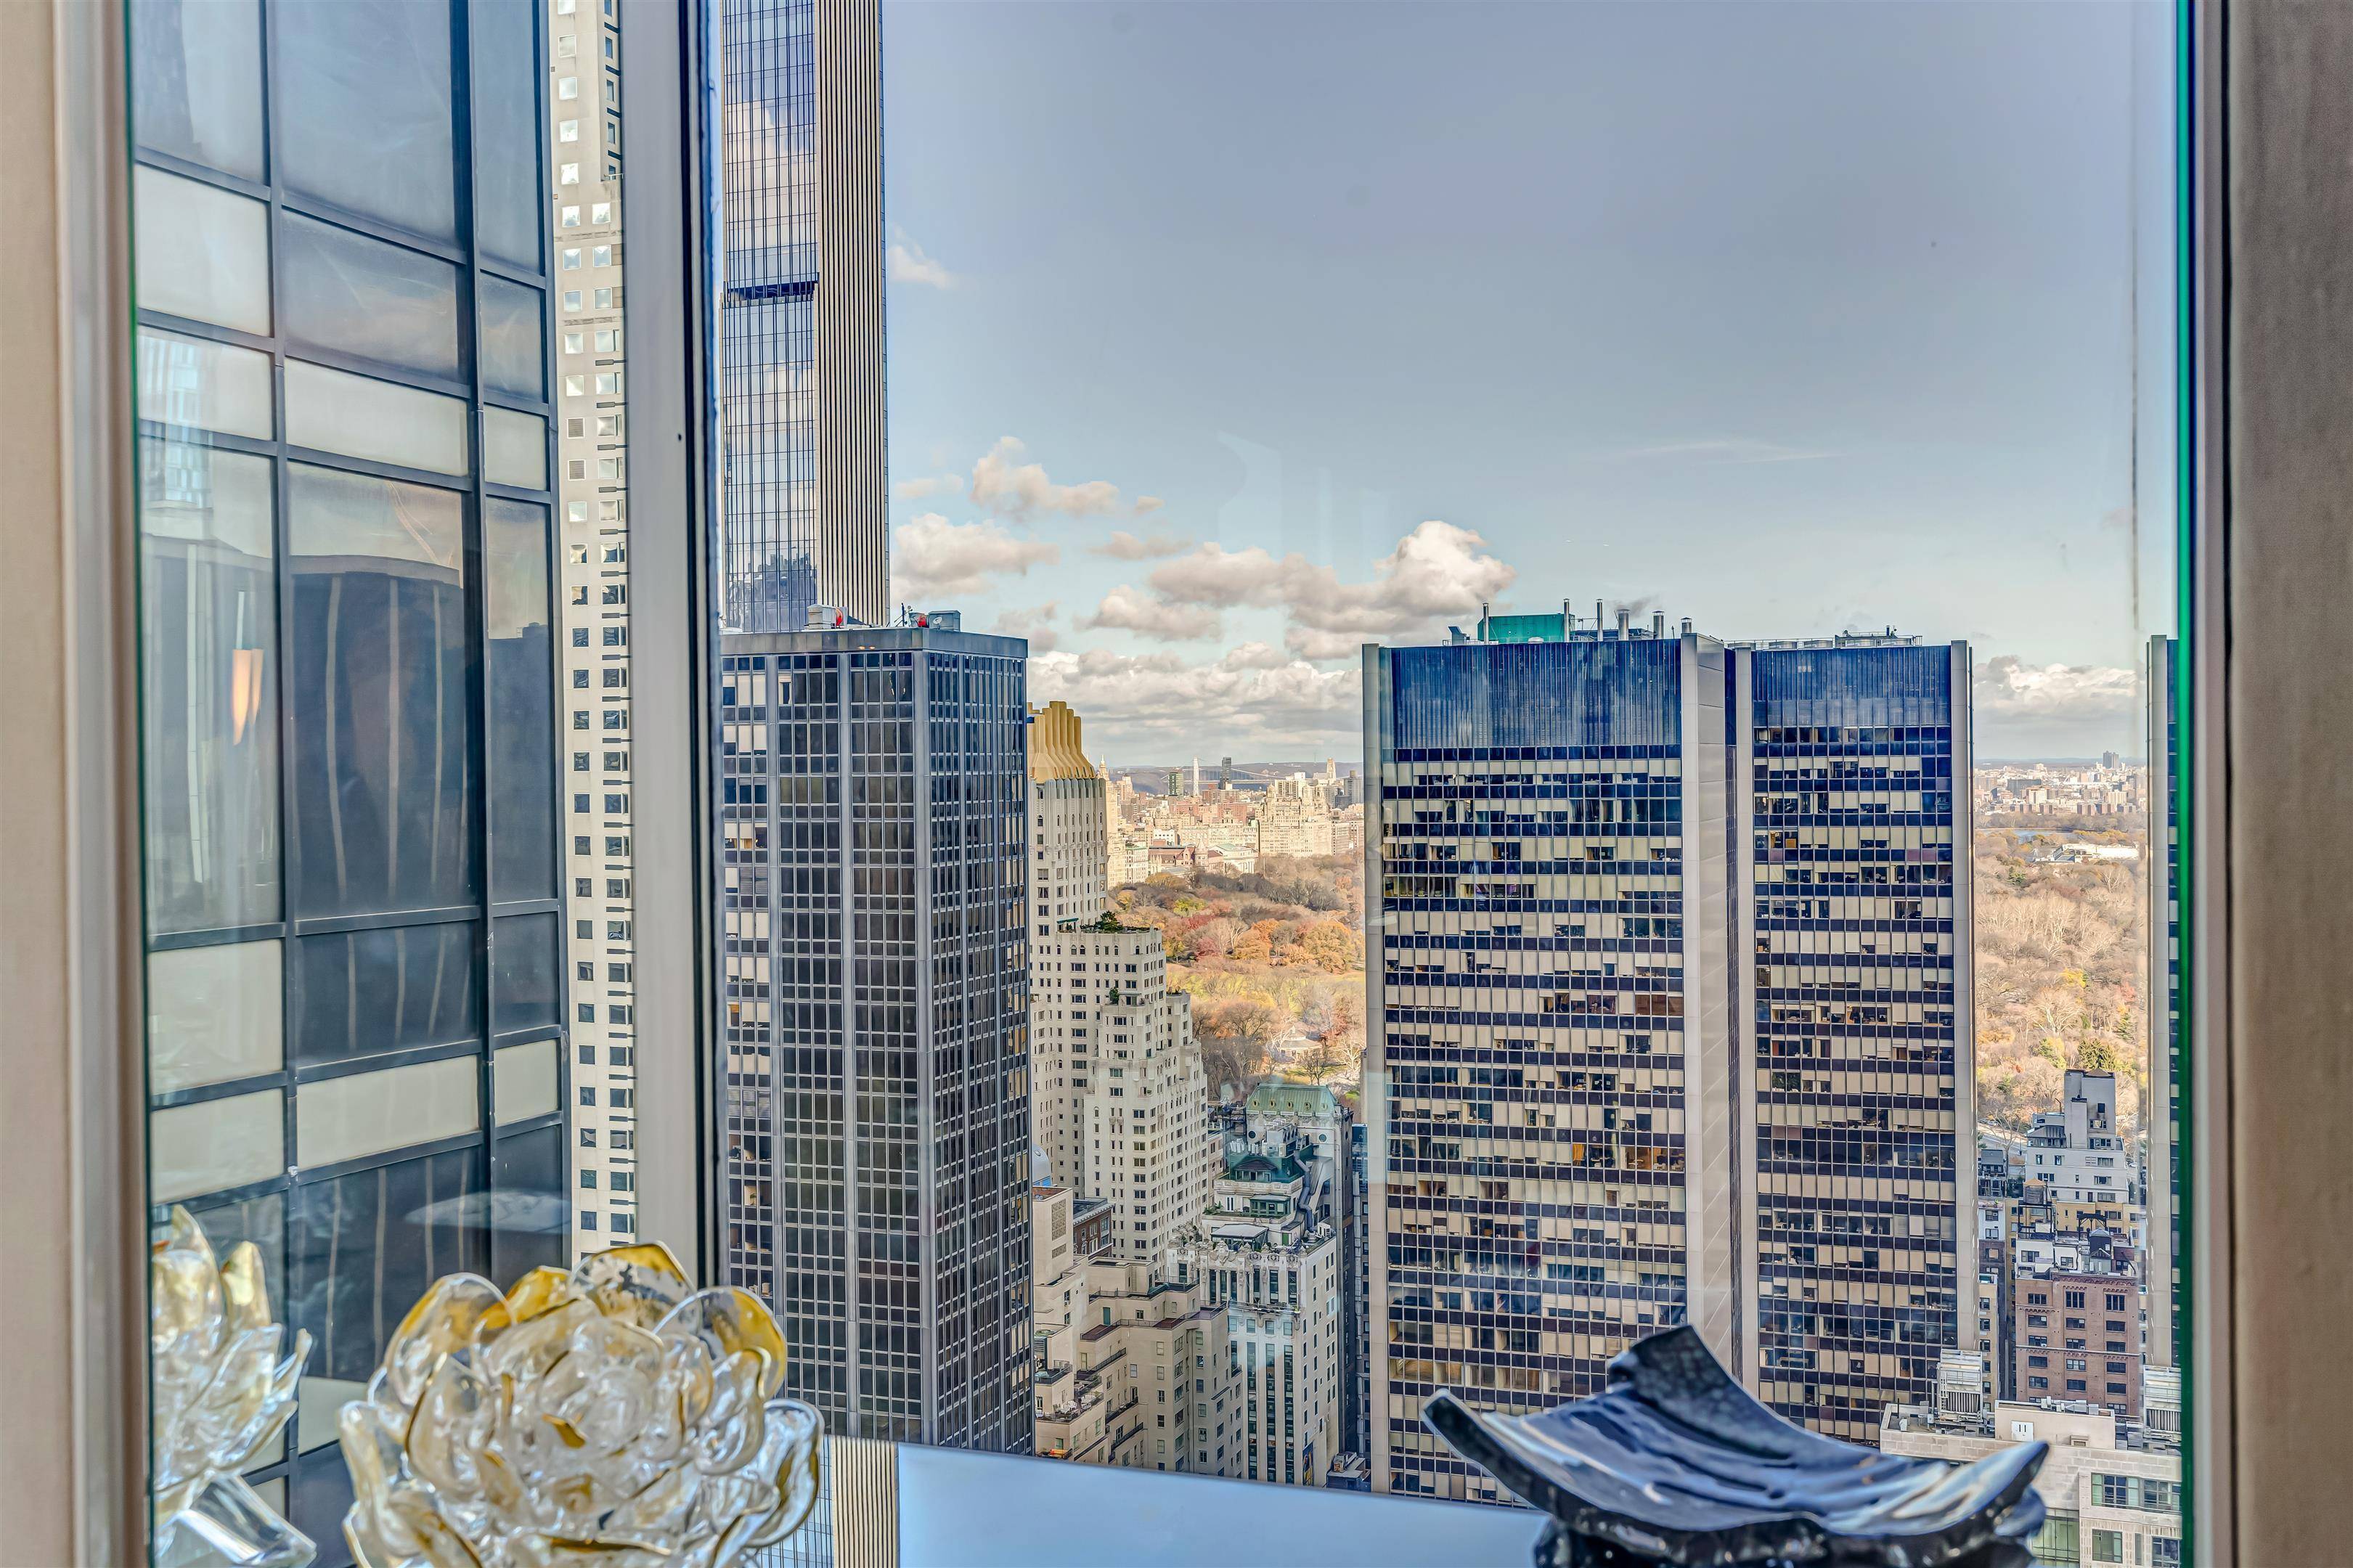 Overflowing with chic and clever design, this oversize 1 bedroom corner condo offers prime views of Central Park, the skyline, and Manhattans glittering evening lights.